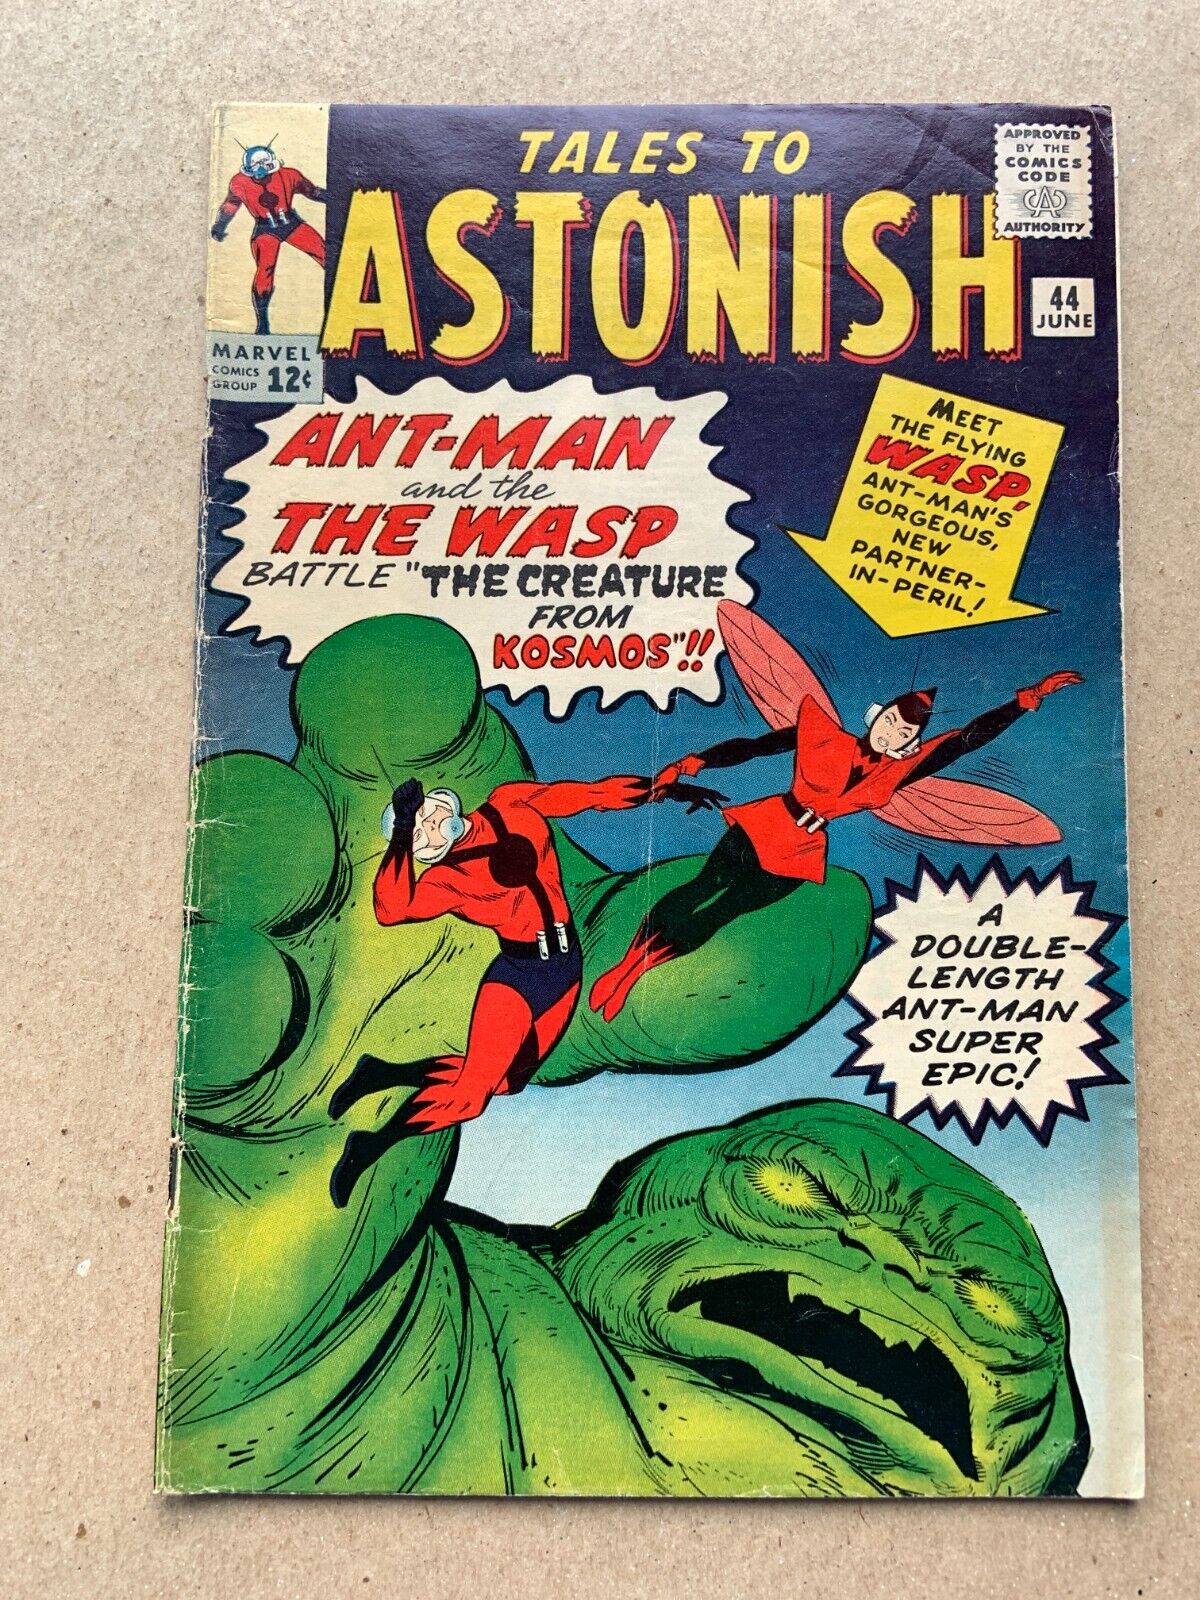 Tales to Astonish #44 1963 Ant Man, Wasp